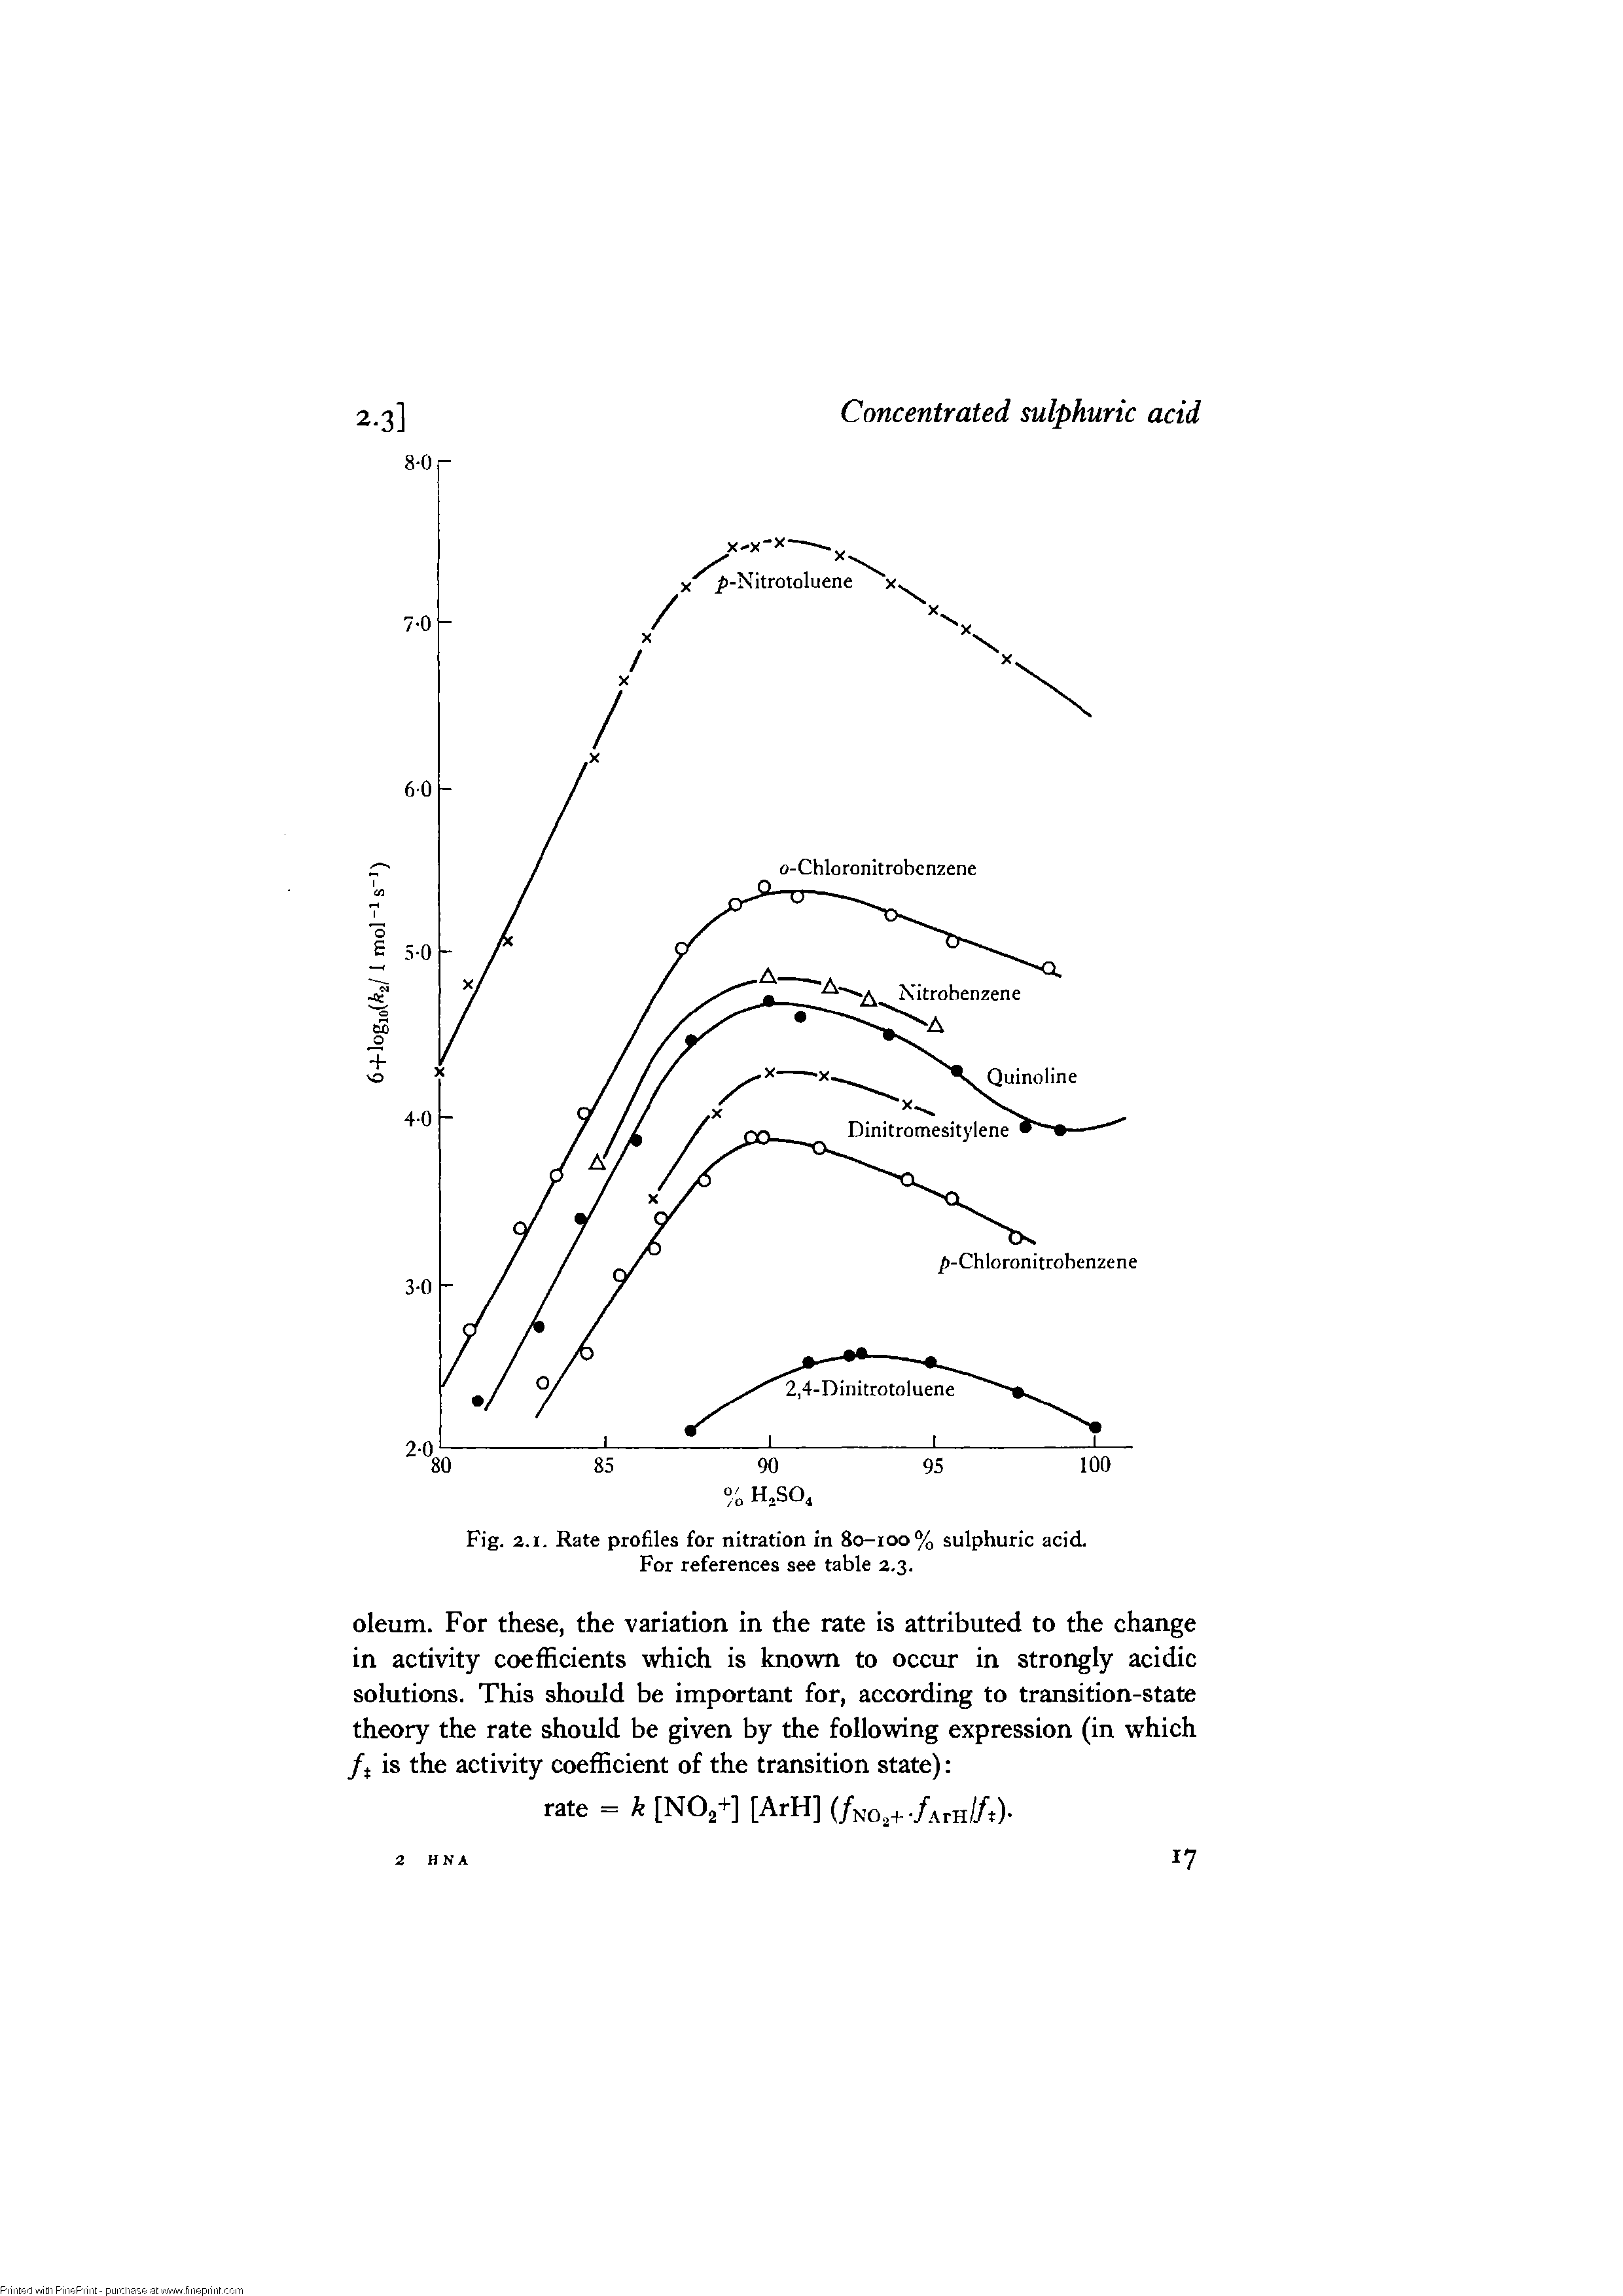 Fig. 2.1. Rate profiles for nitration in 80-100% sulphuric acid. For references see table 3.3.